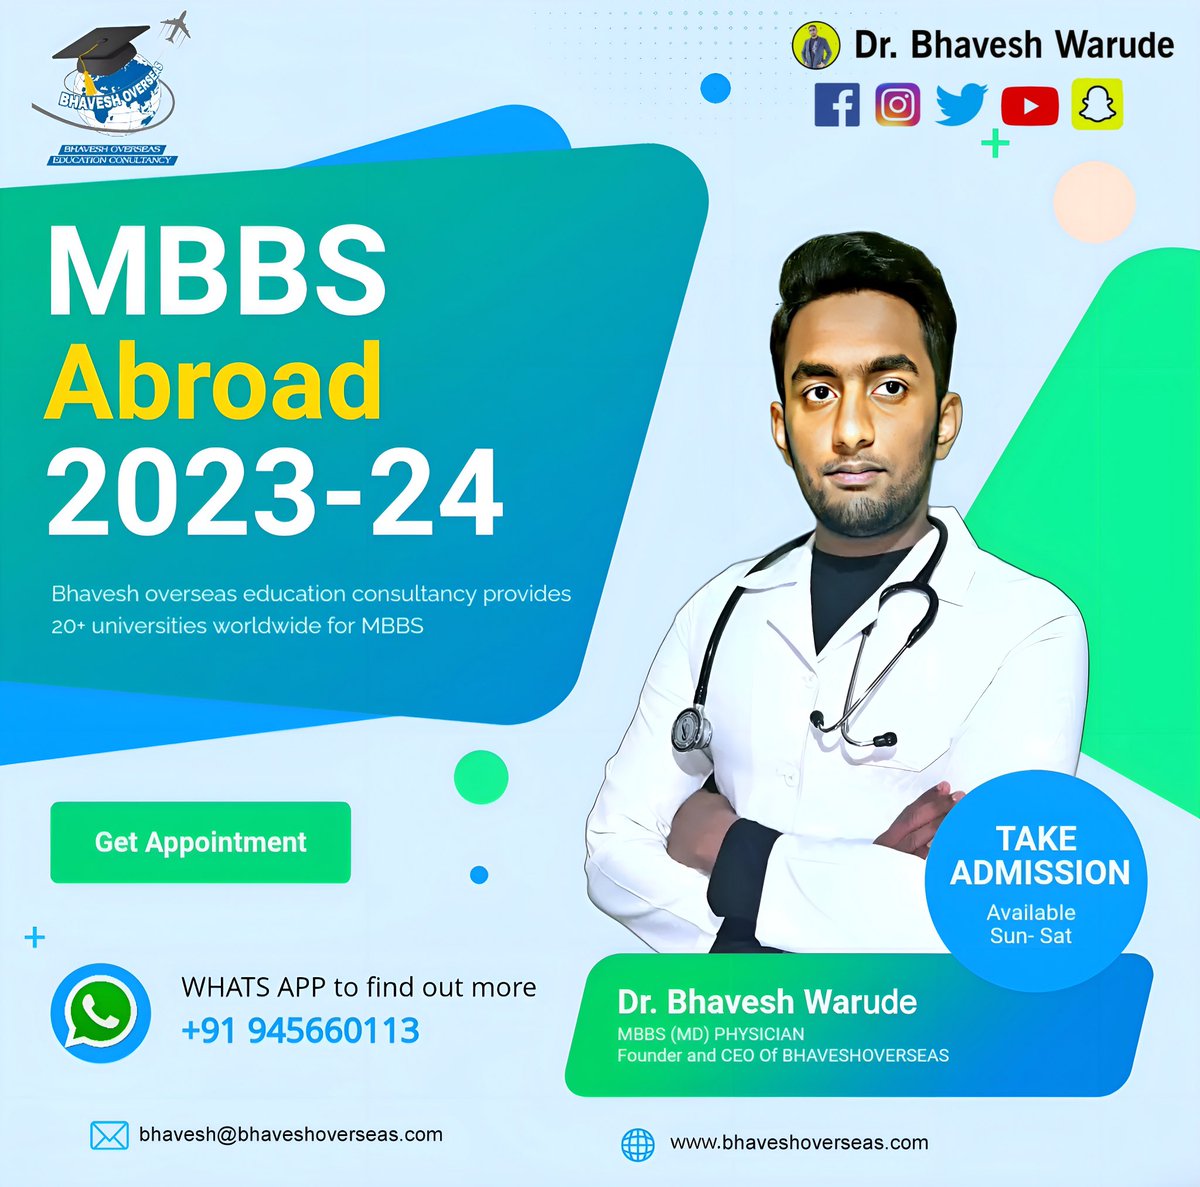 MBBS ABROAD ADMISSIONS HAVE ALREADY STARTED CONTACT FOR MORE INFORMATION PACKAGES FROM 15 to 25 Lakhs

#mbbs #abroadmbbs #educationconsultancy #bhaveshoverseas #russia #kyrgyzstan #russia #russiambbs #germany #america #americambbs #india #uzbekistan #mbbsuzbekistan #kazakhstan